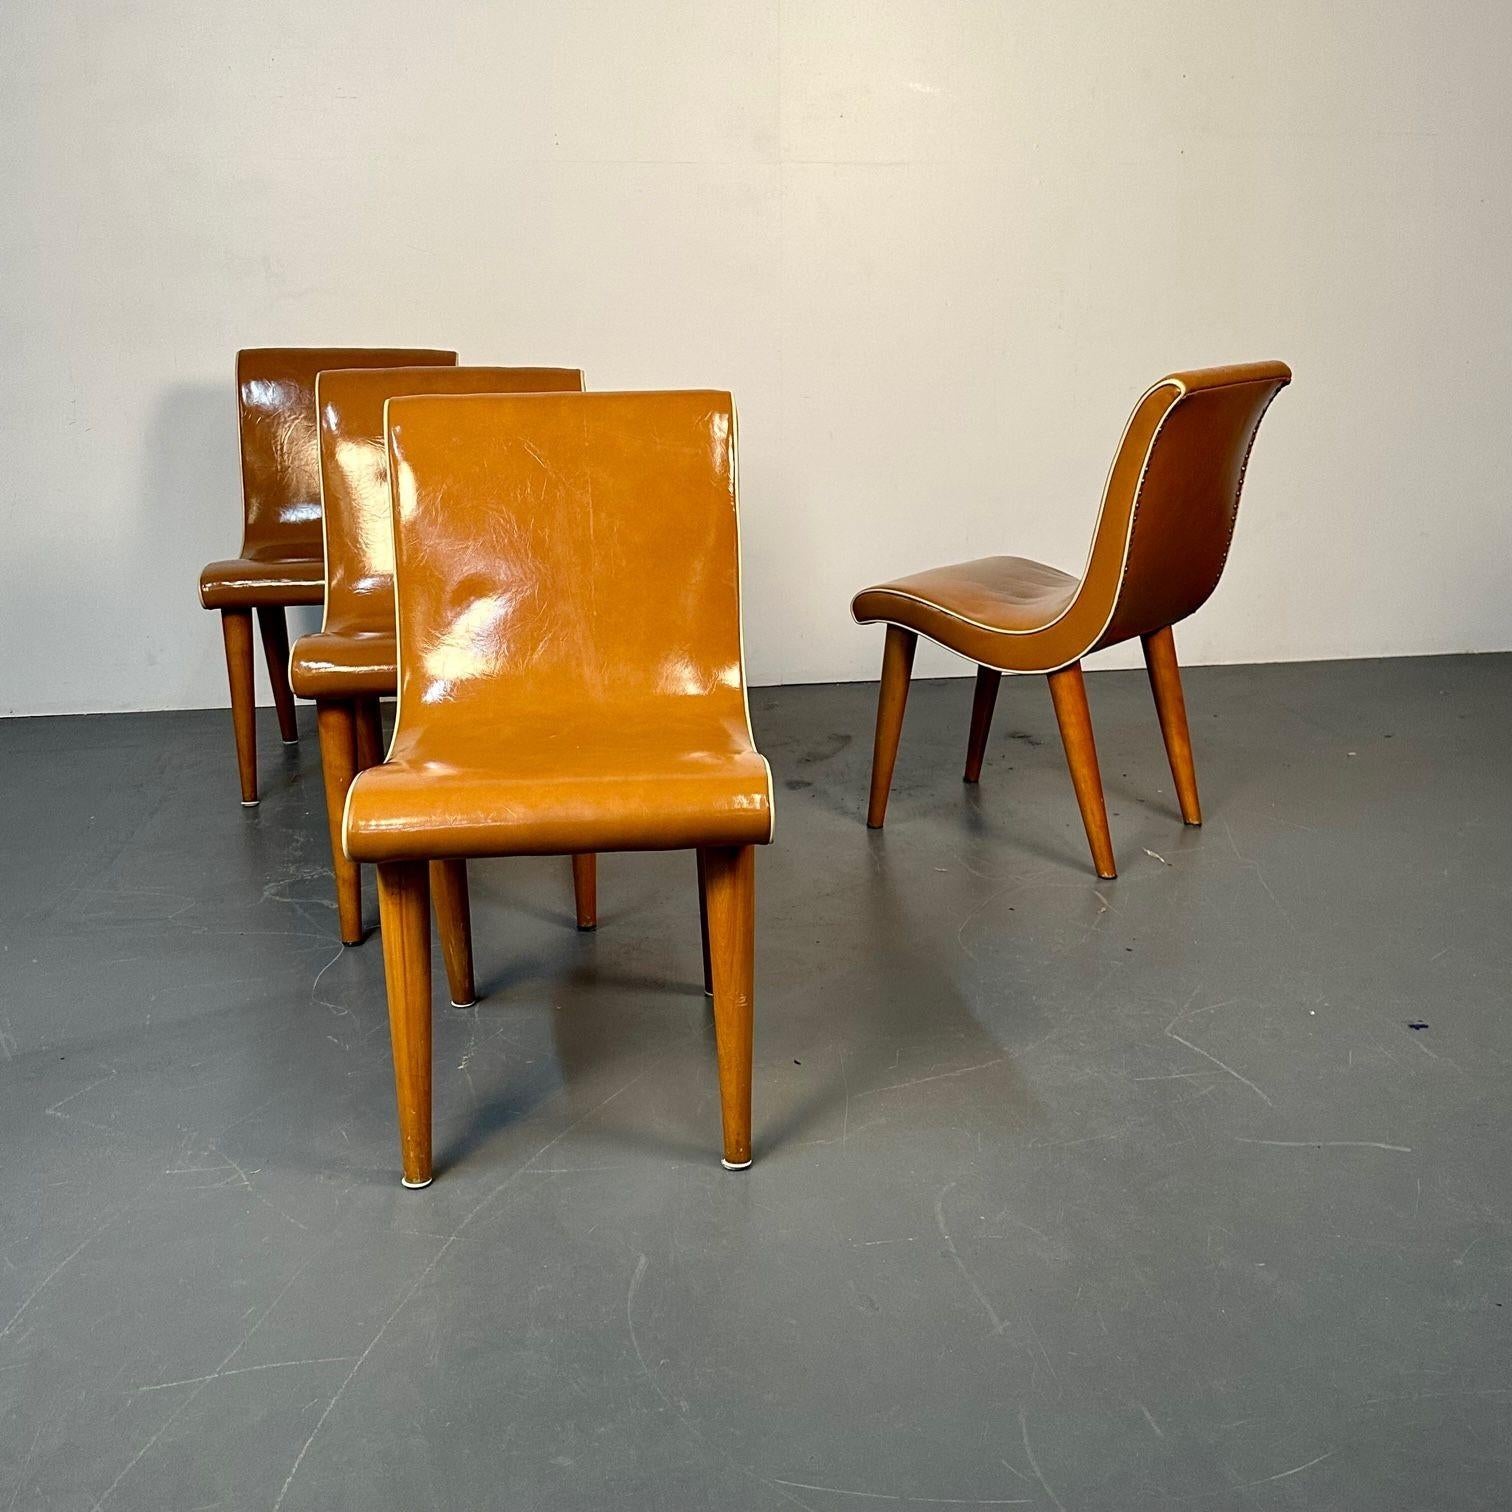 Four American Mid-Century Modern Curvy Dining / Side Chairs by Russel Wright For Sale 3